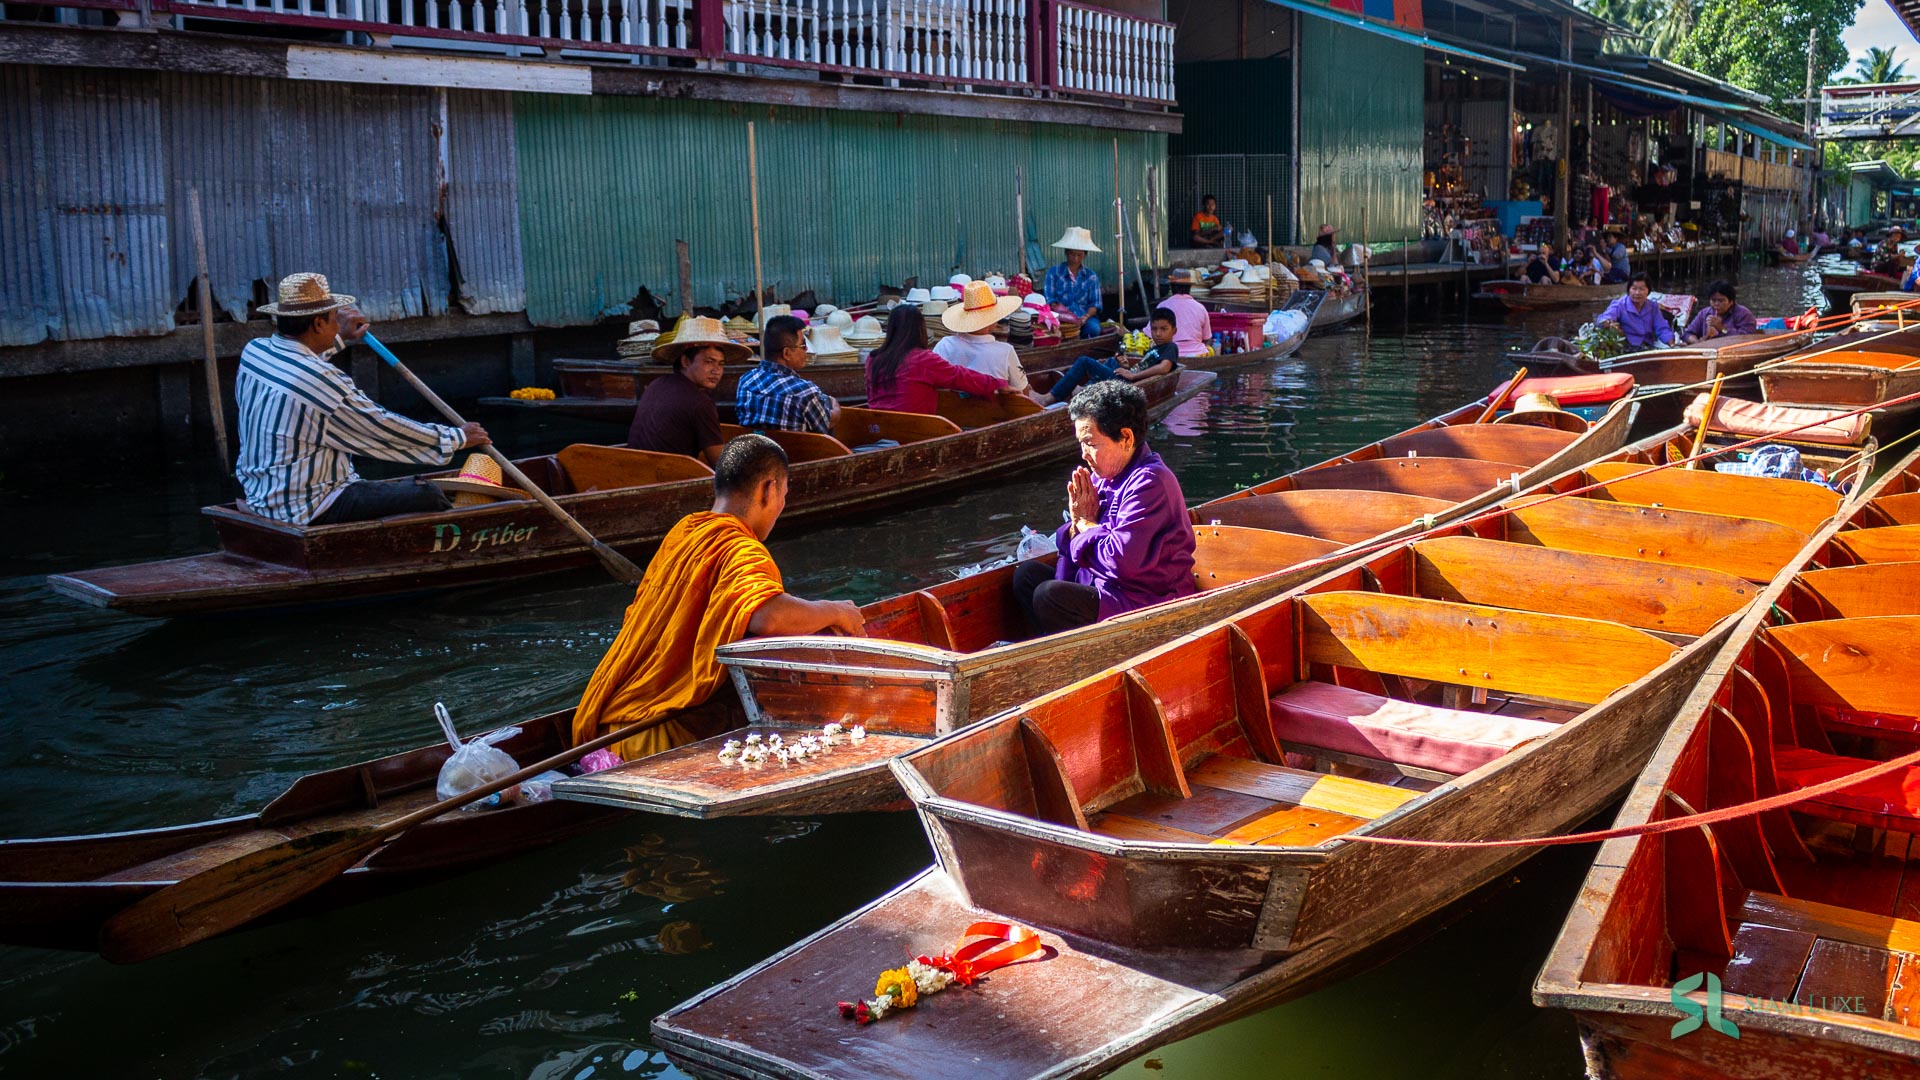 Local people is receiving the bless from Buddhist Monk on the boat in Damnoen Saduak Floating Market